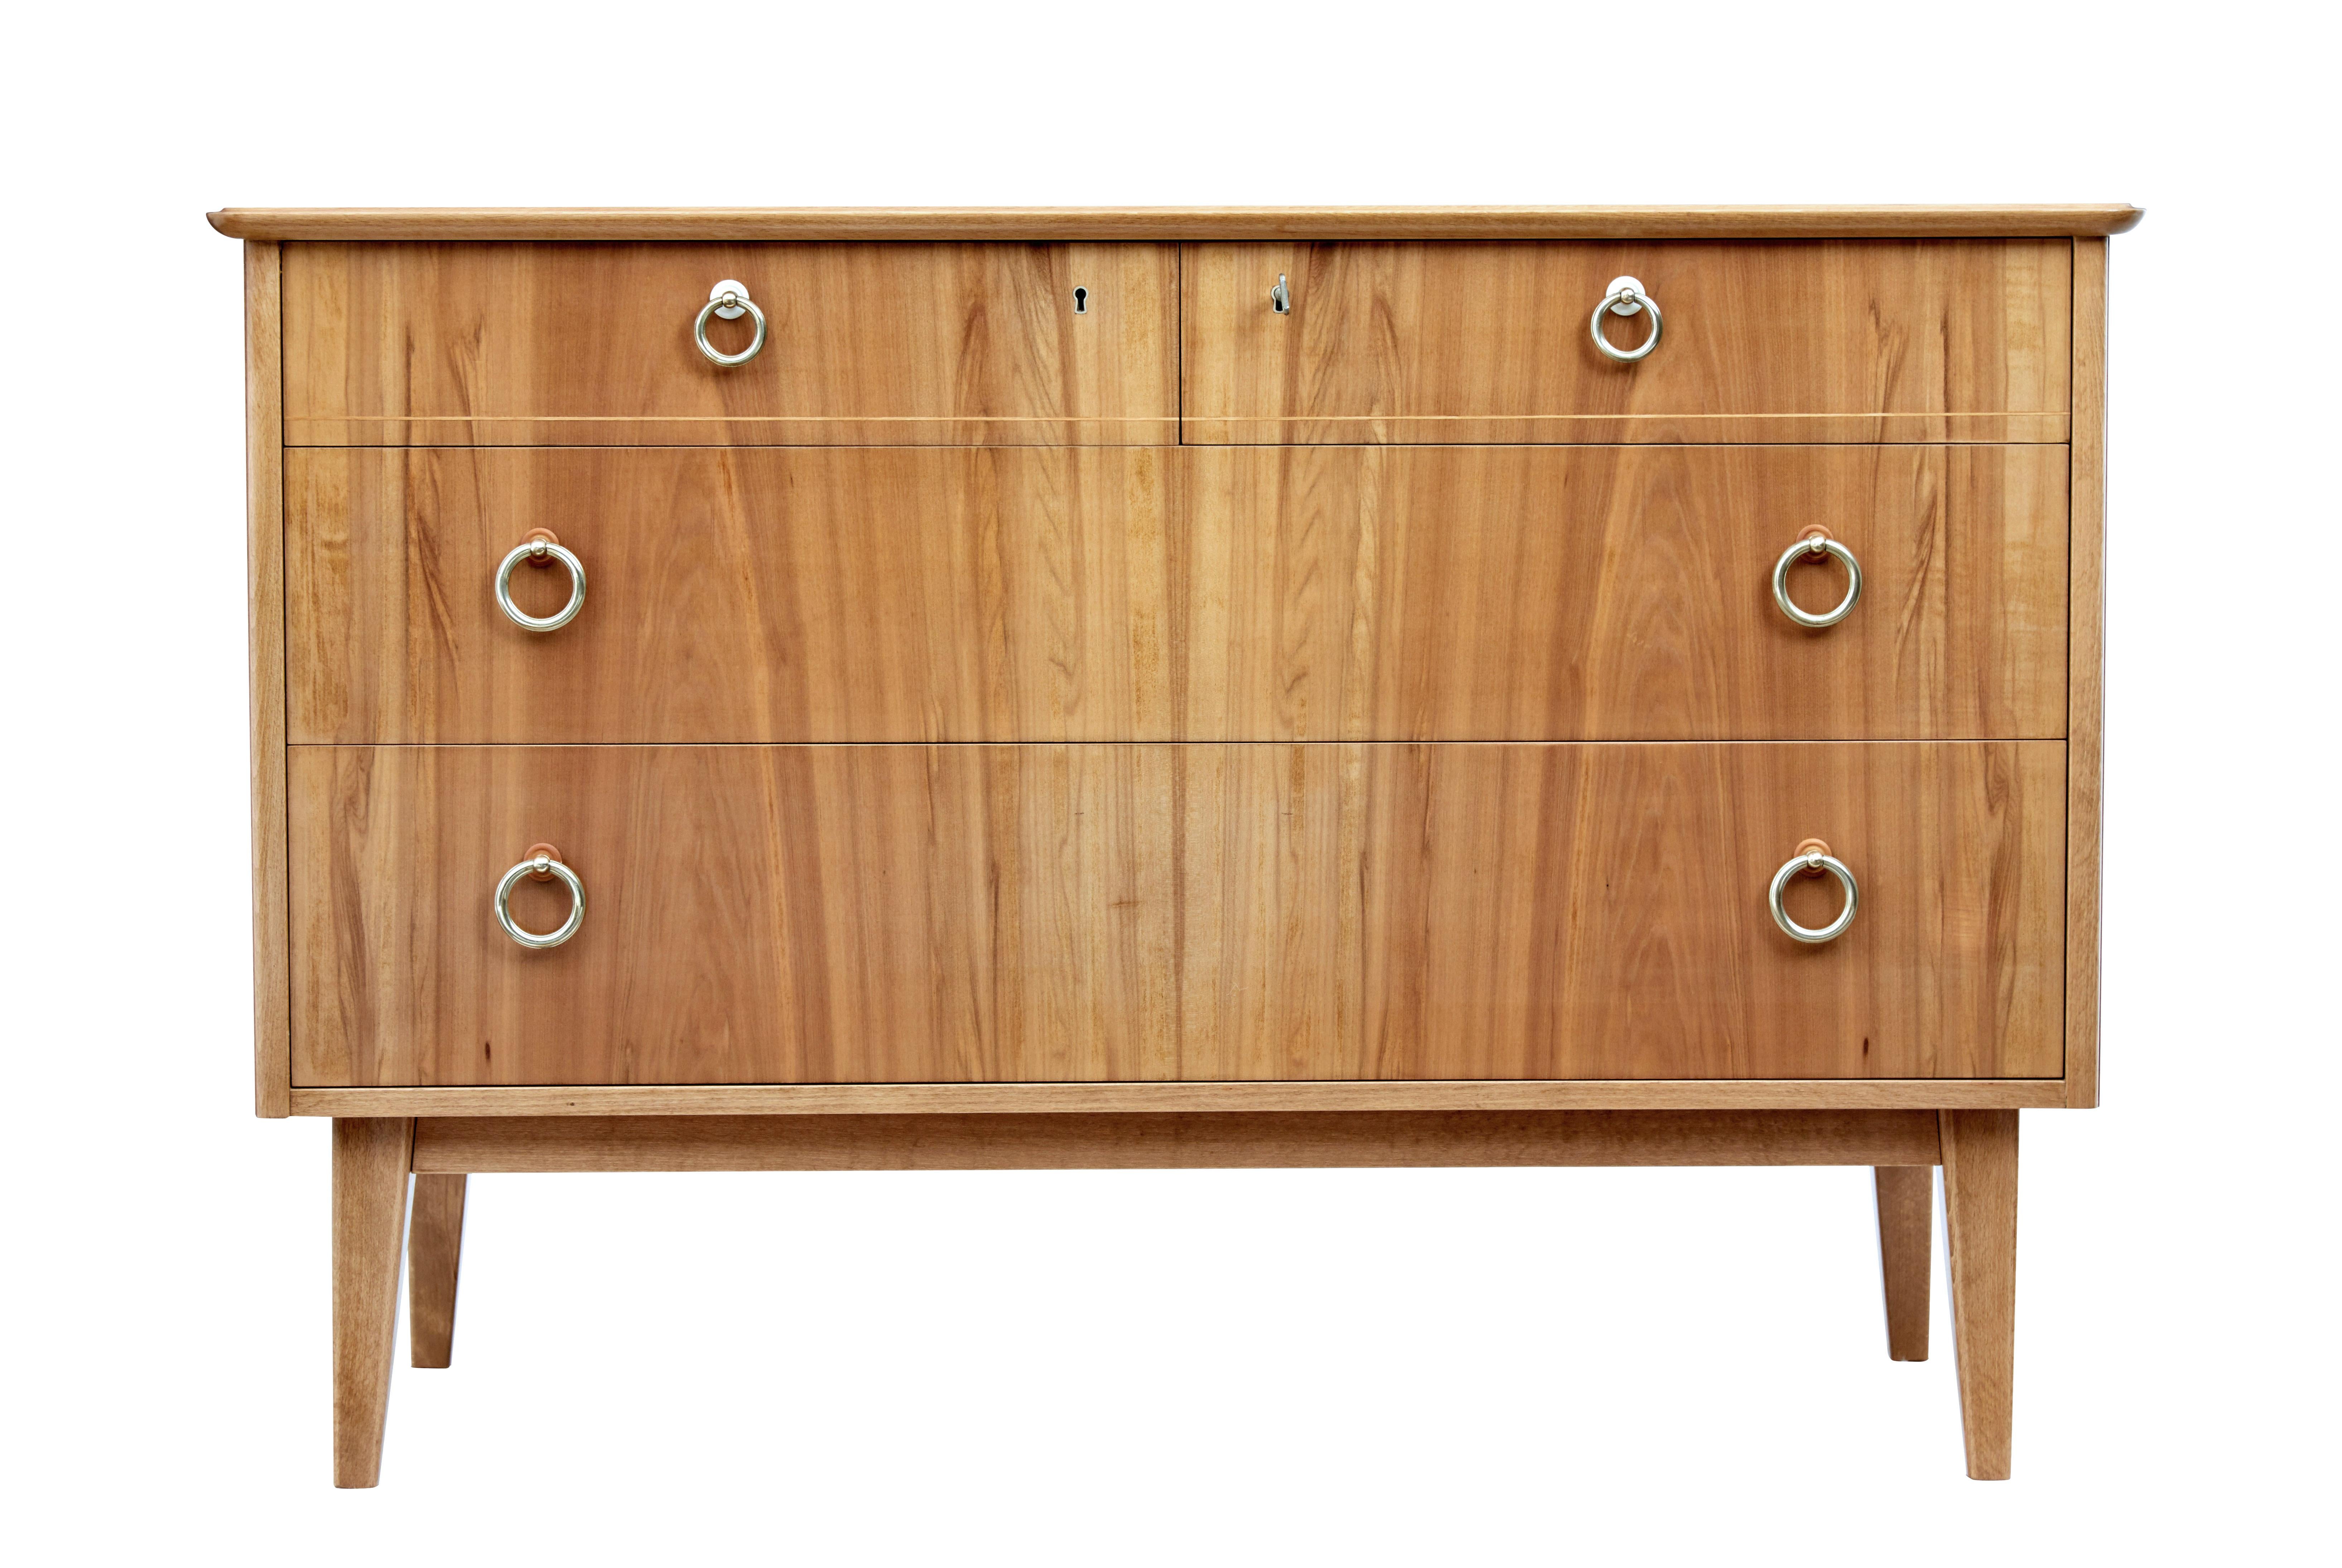 Mid-20th century Swedish walnut chest of drawers by Bodafors, circa 1950.

Good quality chest of drawers finished in light walnut. Fitted with 4 graduating drawers in a 2 over 2 layout, complete with original brass ring handles. Stringing detail